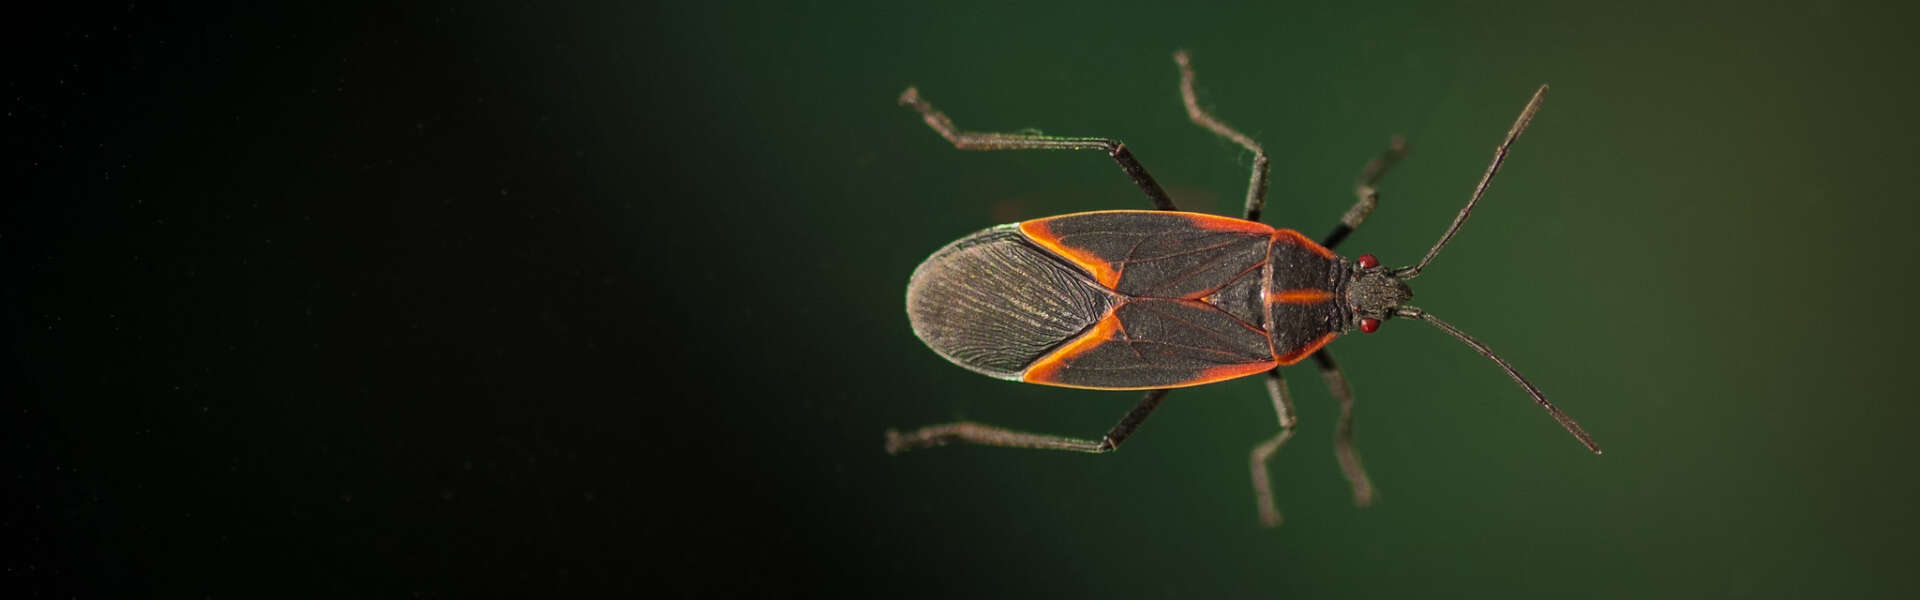 A black bug with red highlights on a green background